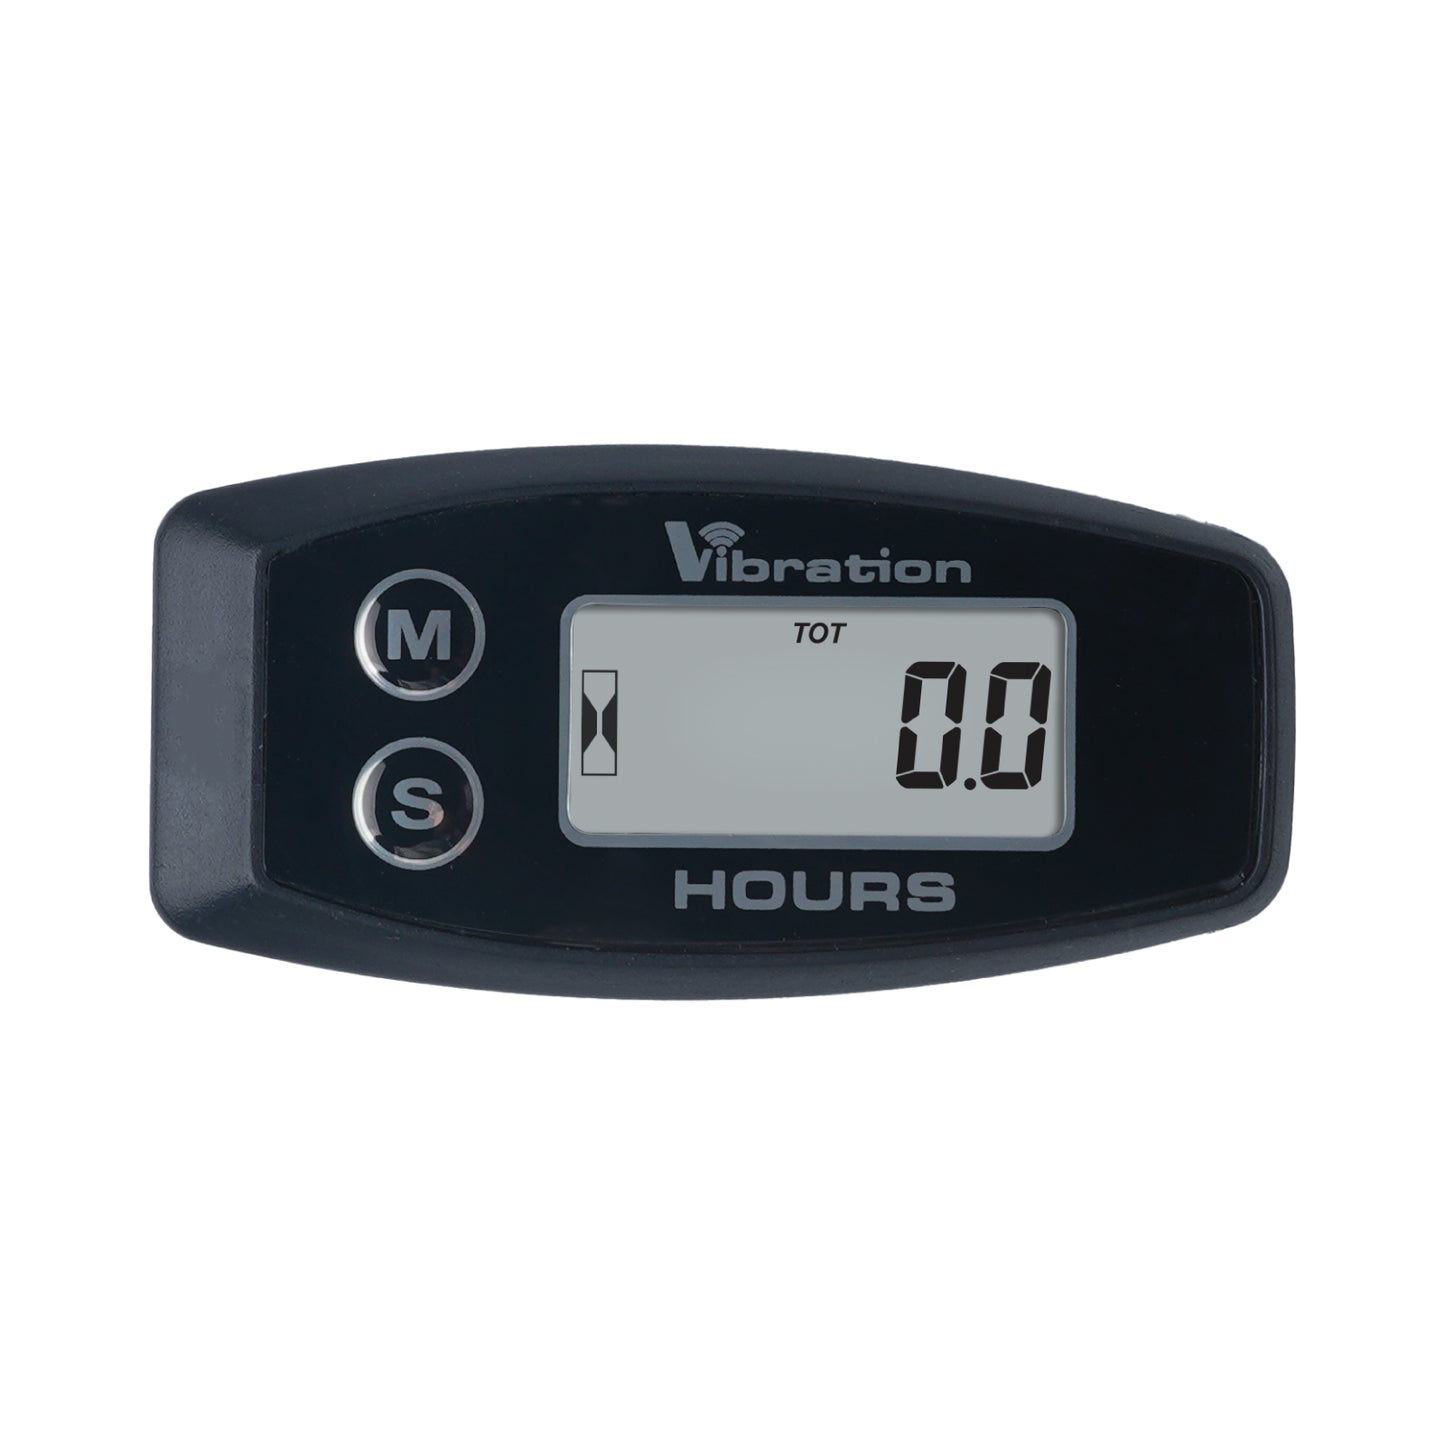 Runleader Digital Mini Vibration Activated Hour Meter Signal Wireless Detect Maintenance Reminder- Used on Gas/ Diesel Engine